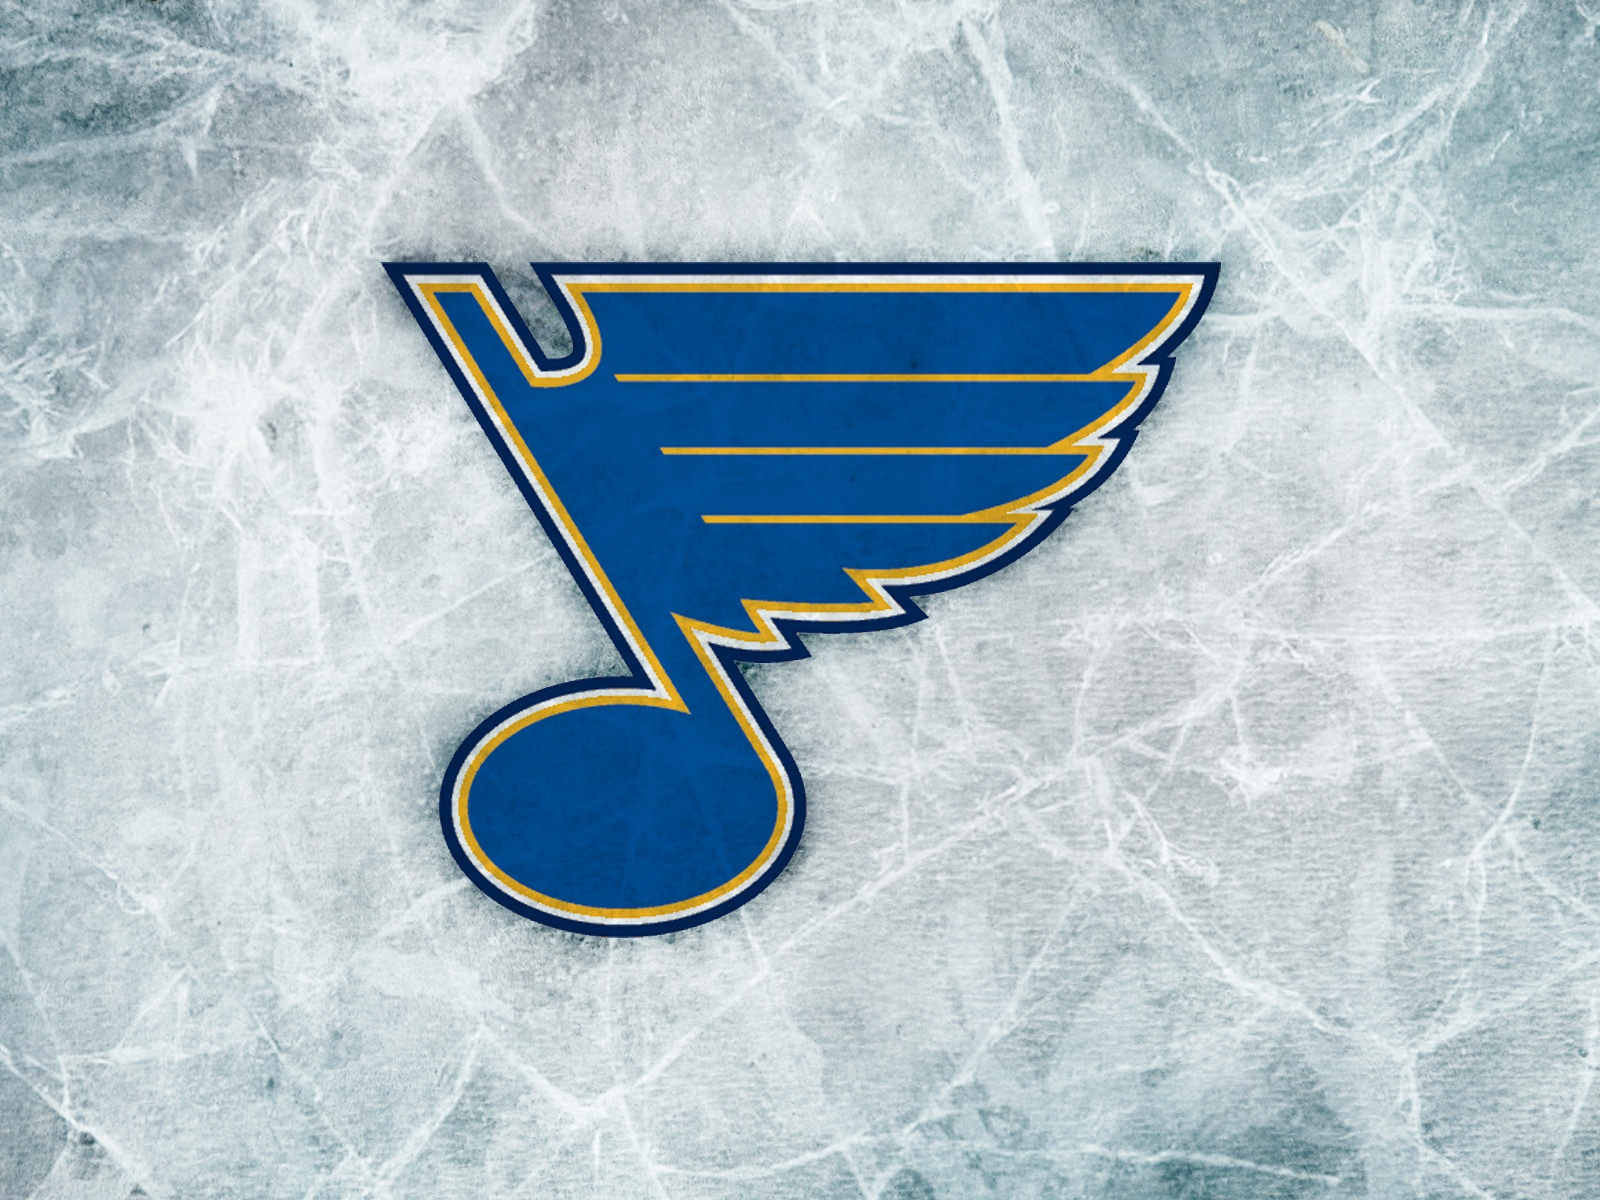 St. Louis Blues Free Agency Additions Could Prove Profitable